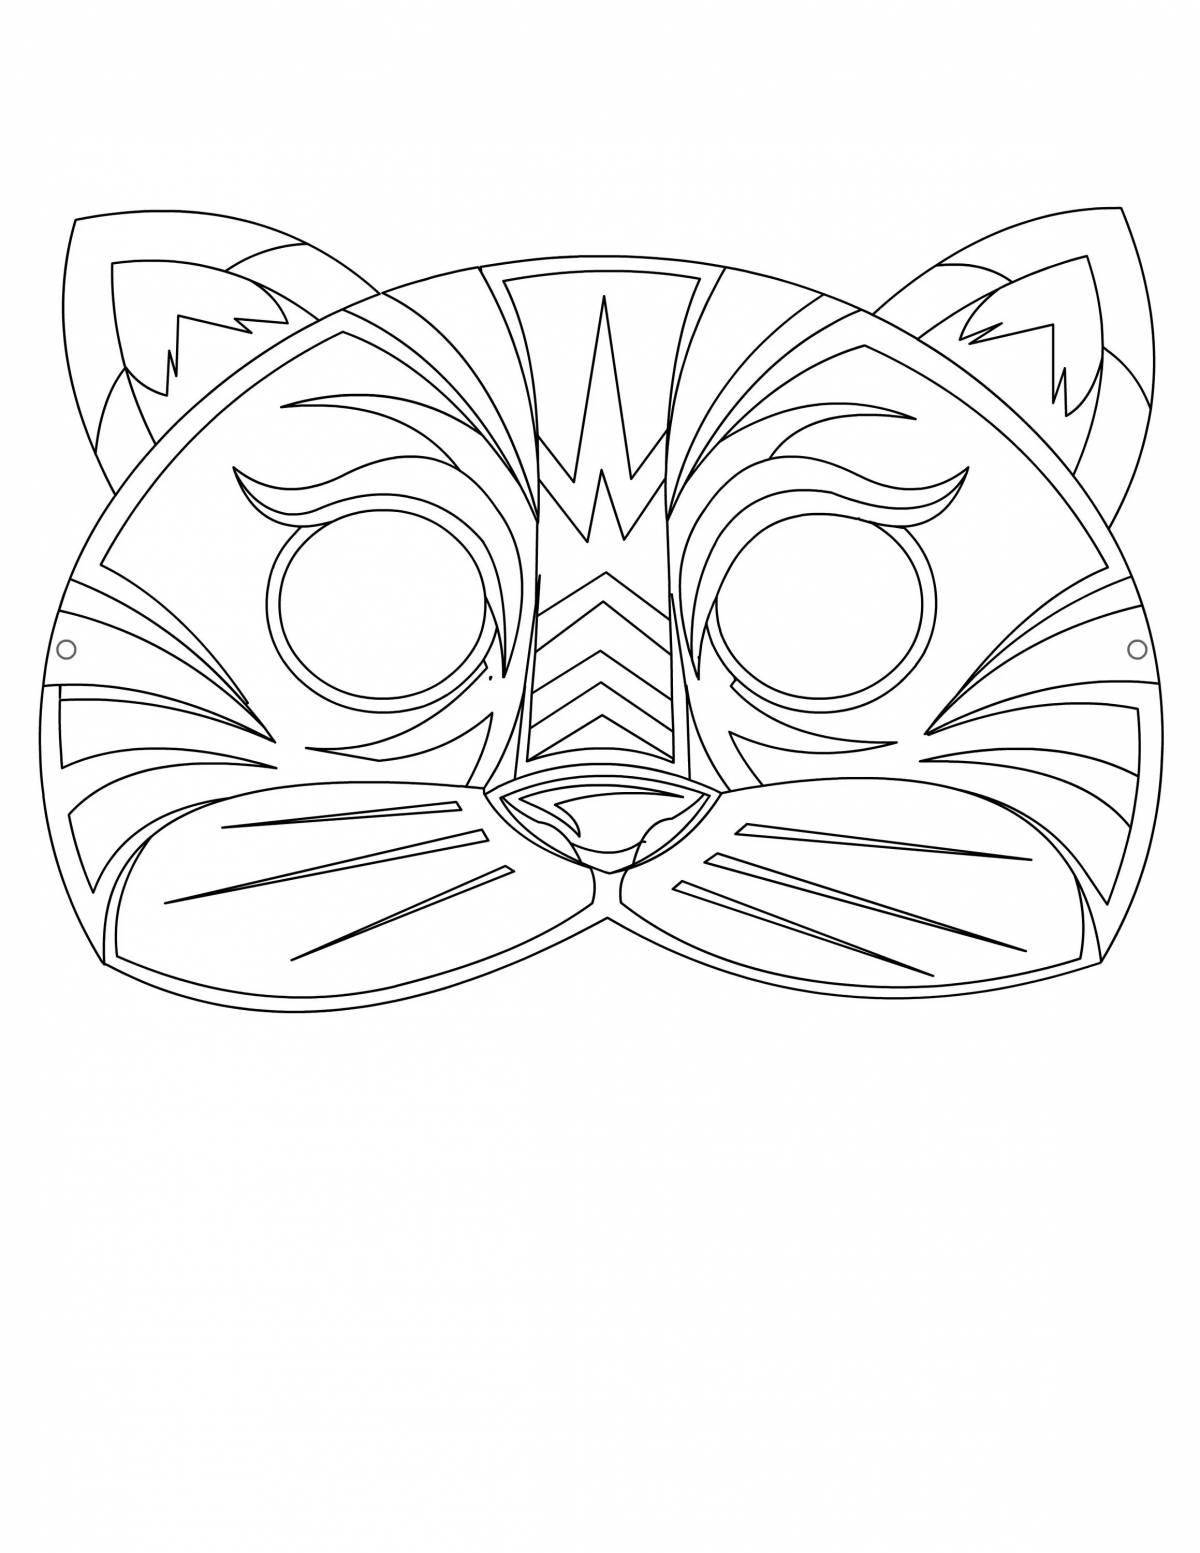 Fine cat mask coloring page